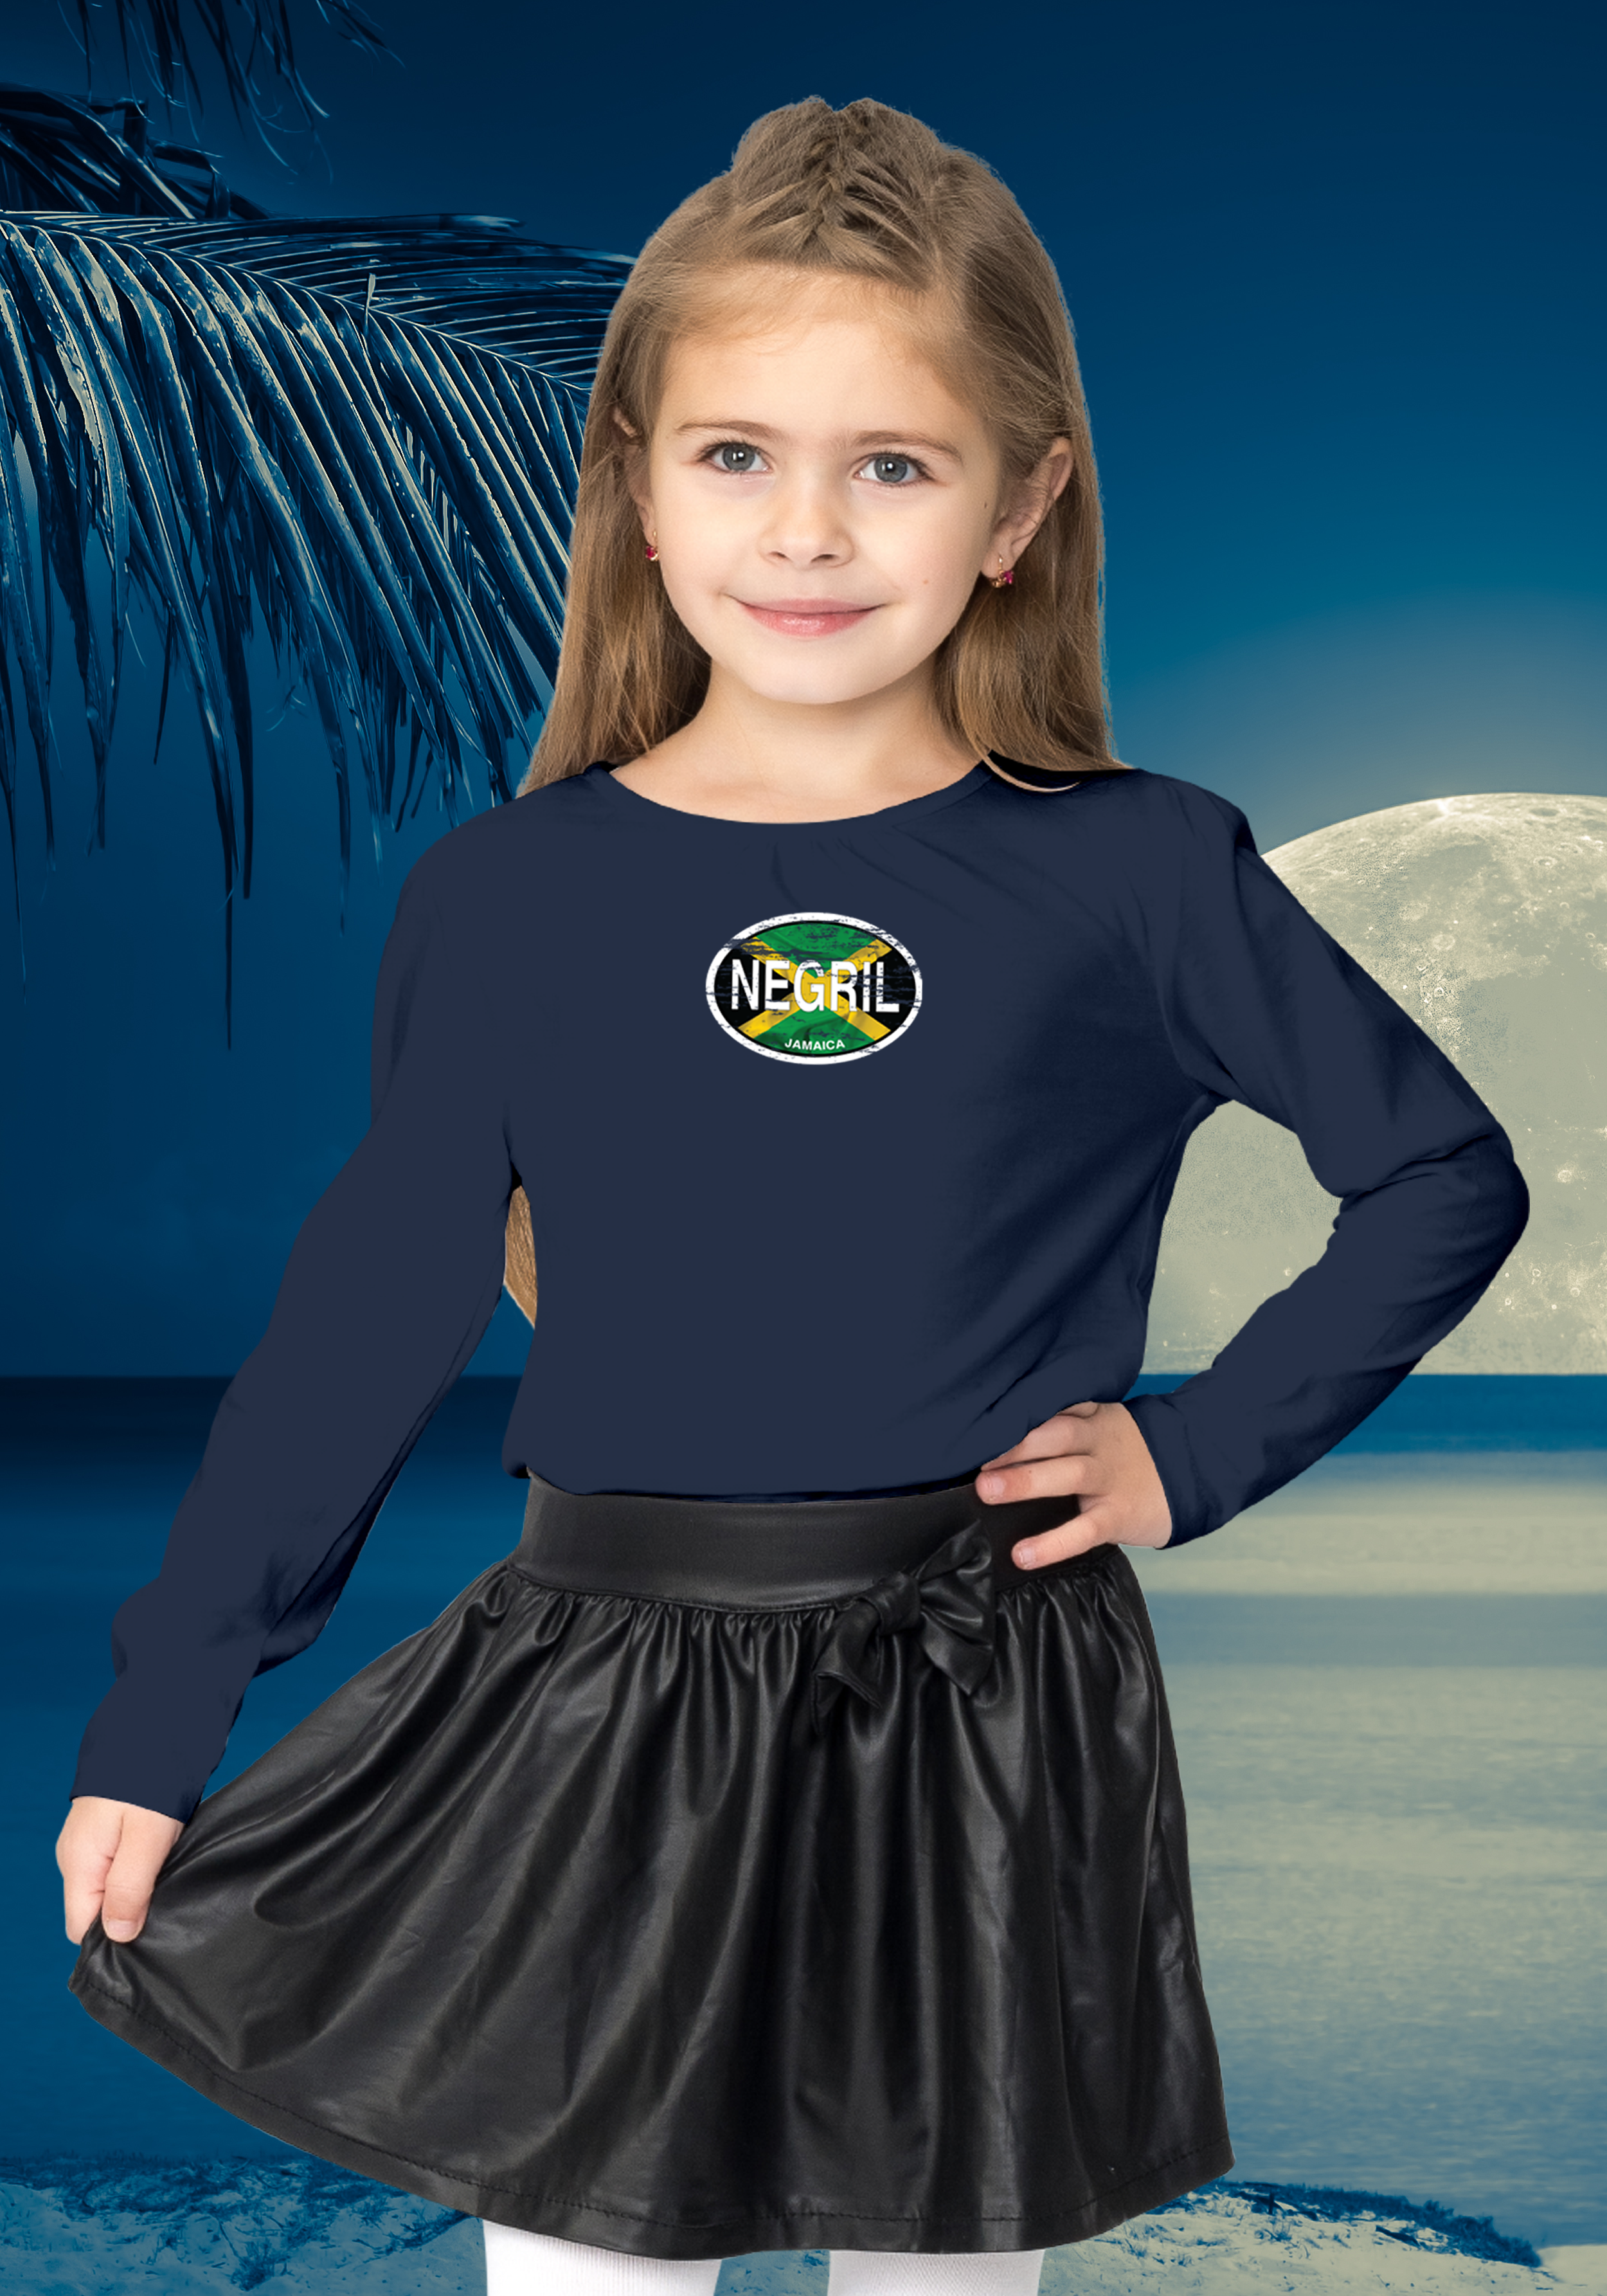 Negril Youth Flag Long Sleeve T-Shirts - My Destination Location